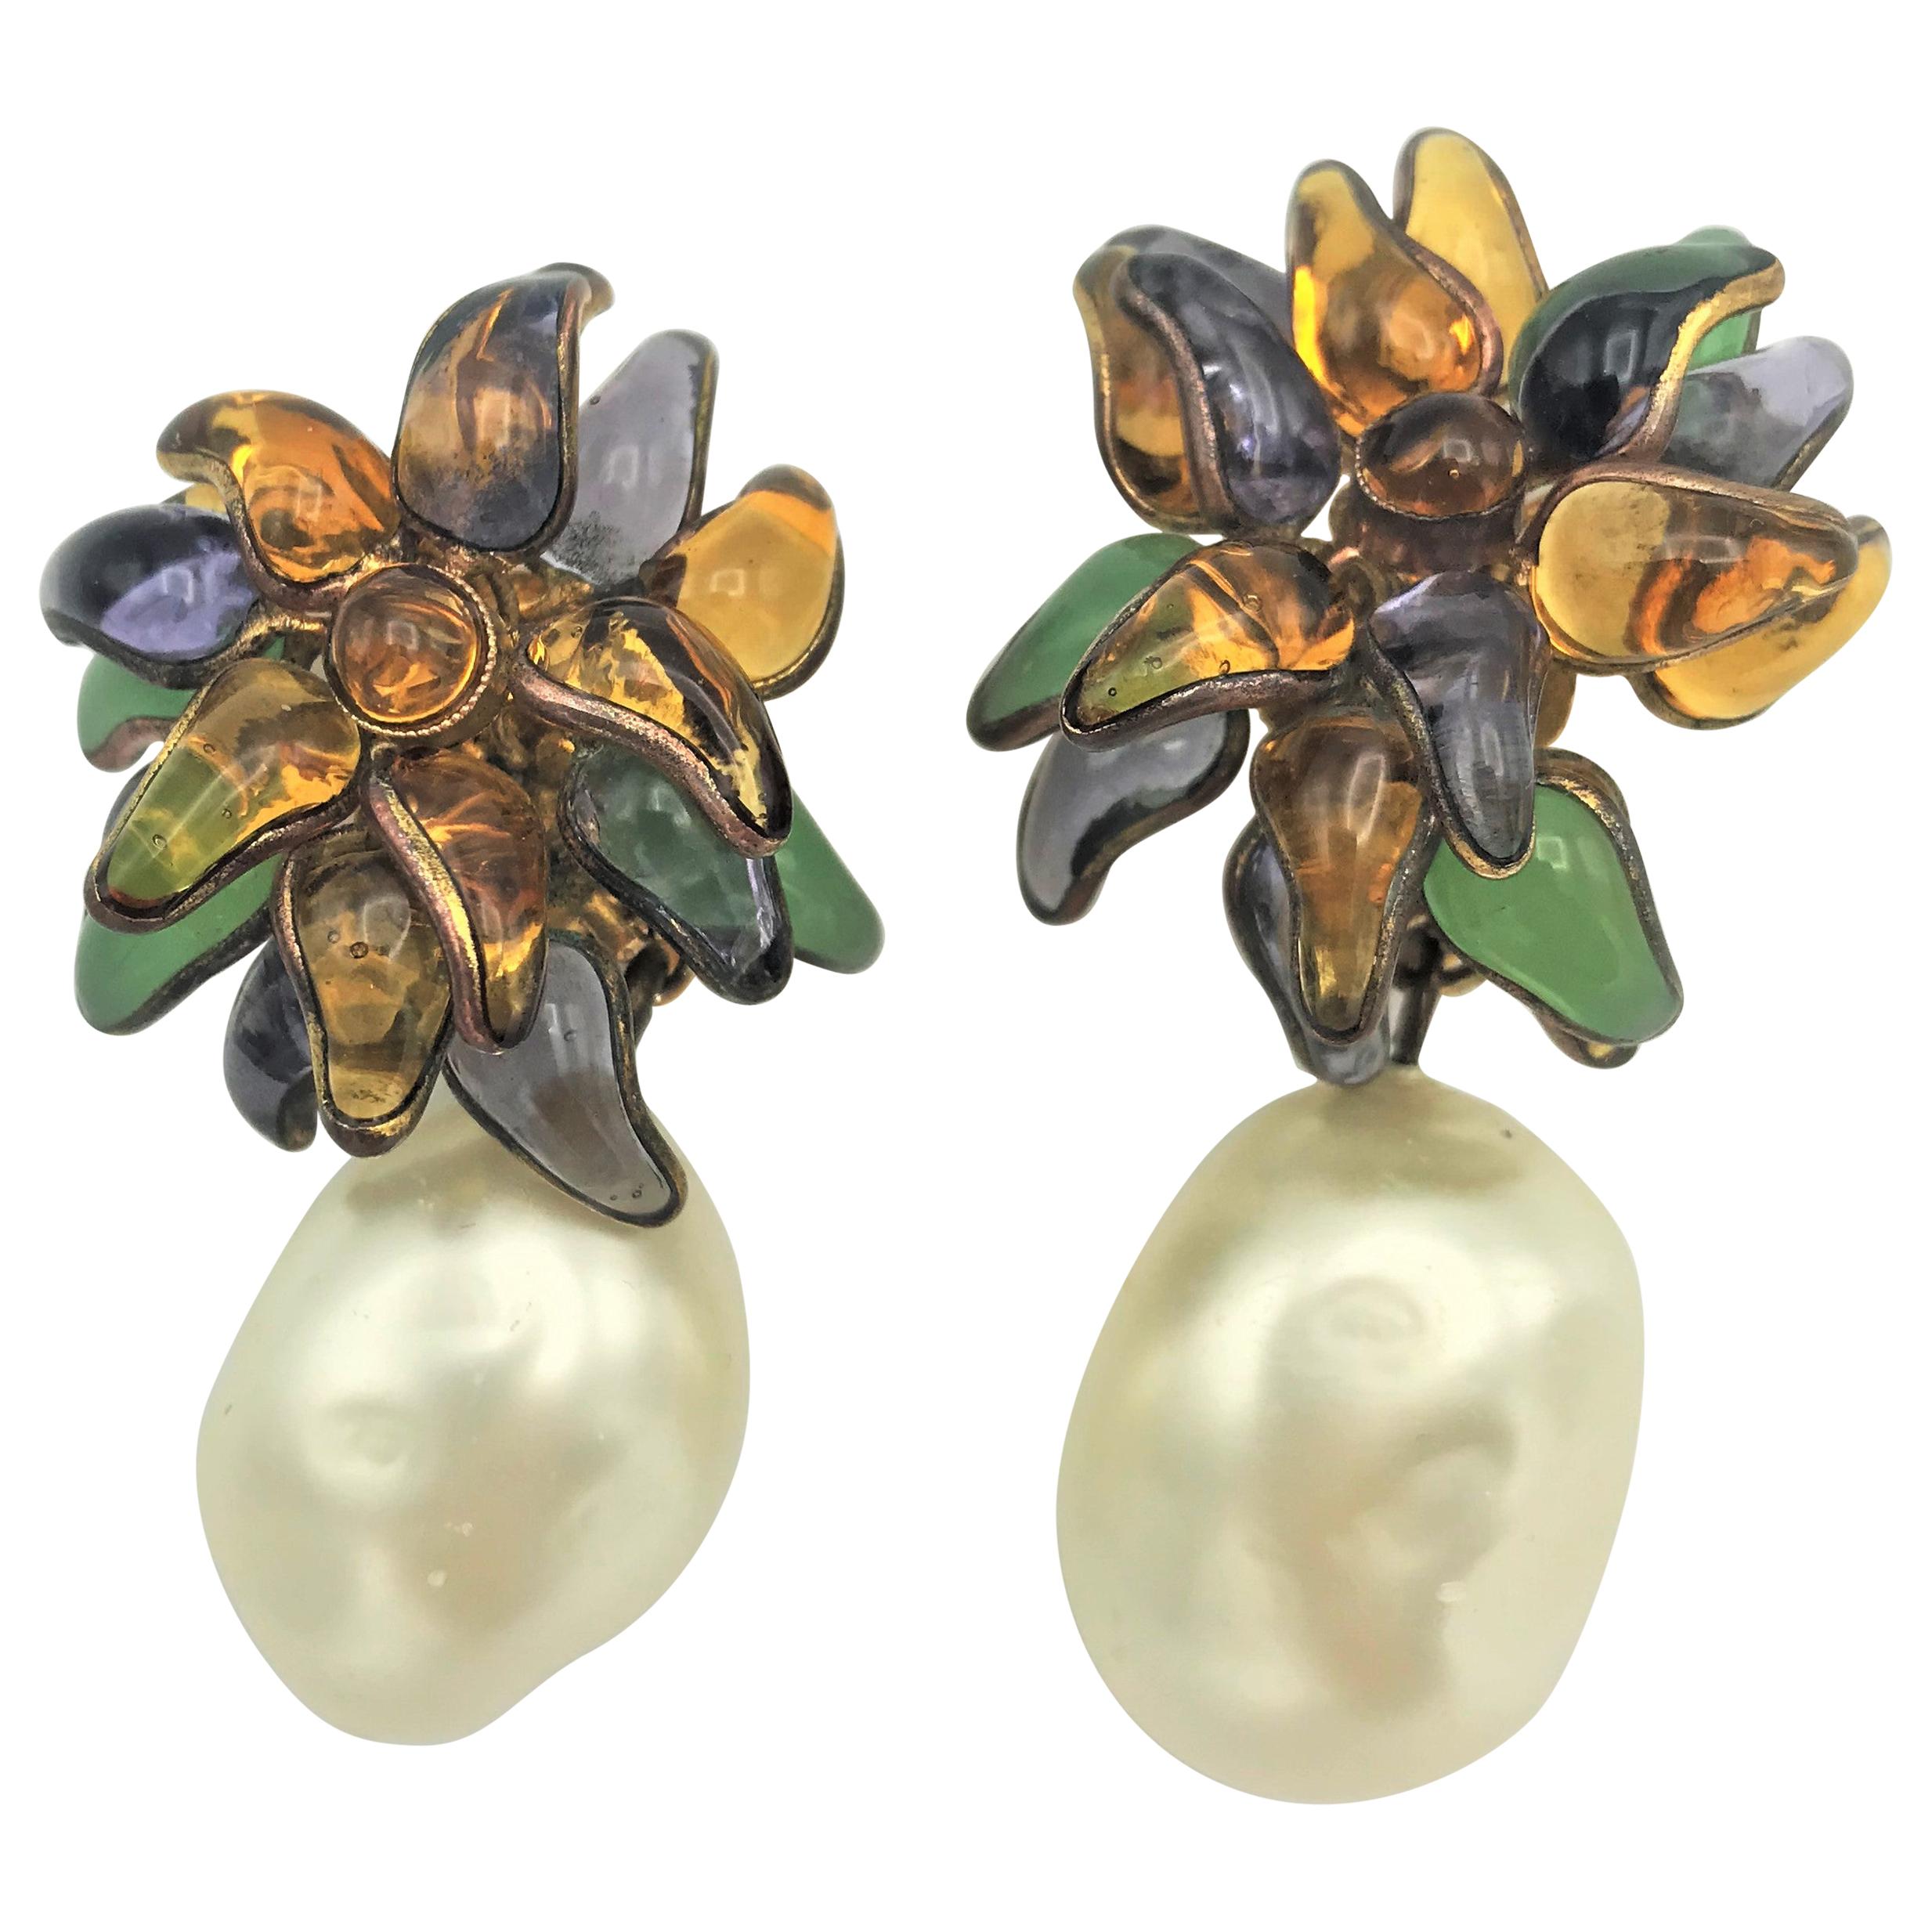 An extraordinary earclip designed by Victoire de Castellane in 1984. The flower is handmade of pured glass with 17 small leaves in four different colors: purple, mint, yellow and brown. On the flower hangs a fantastic and huge faux pearl which is